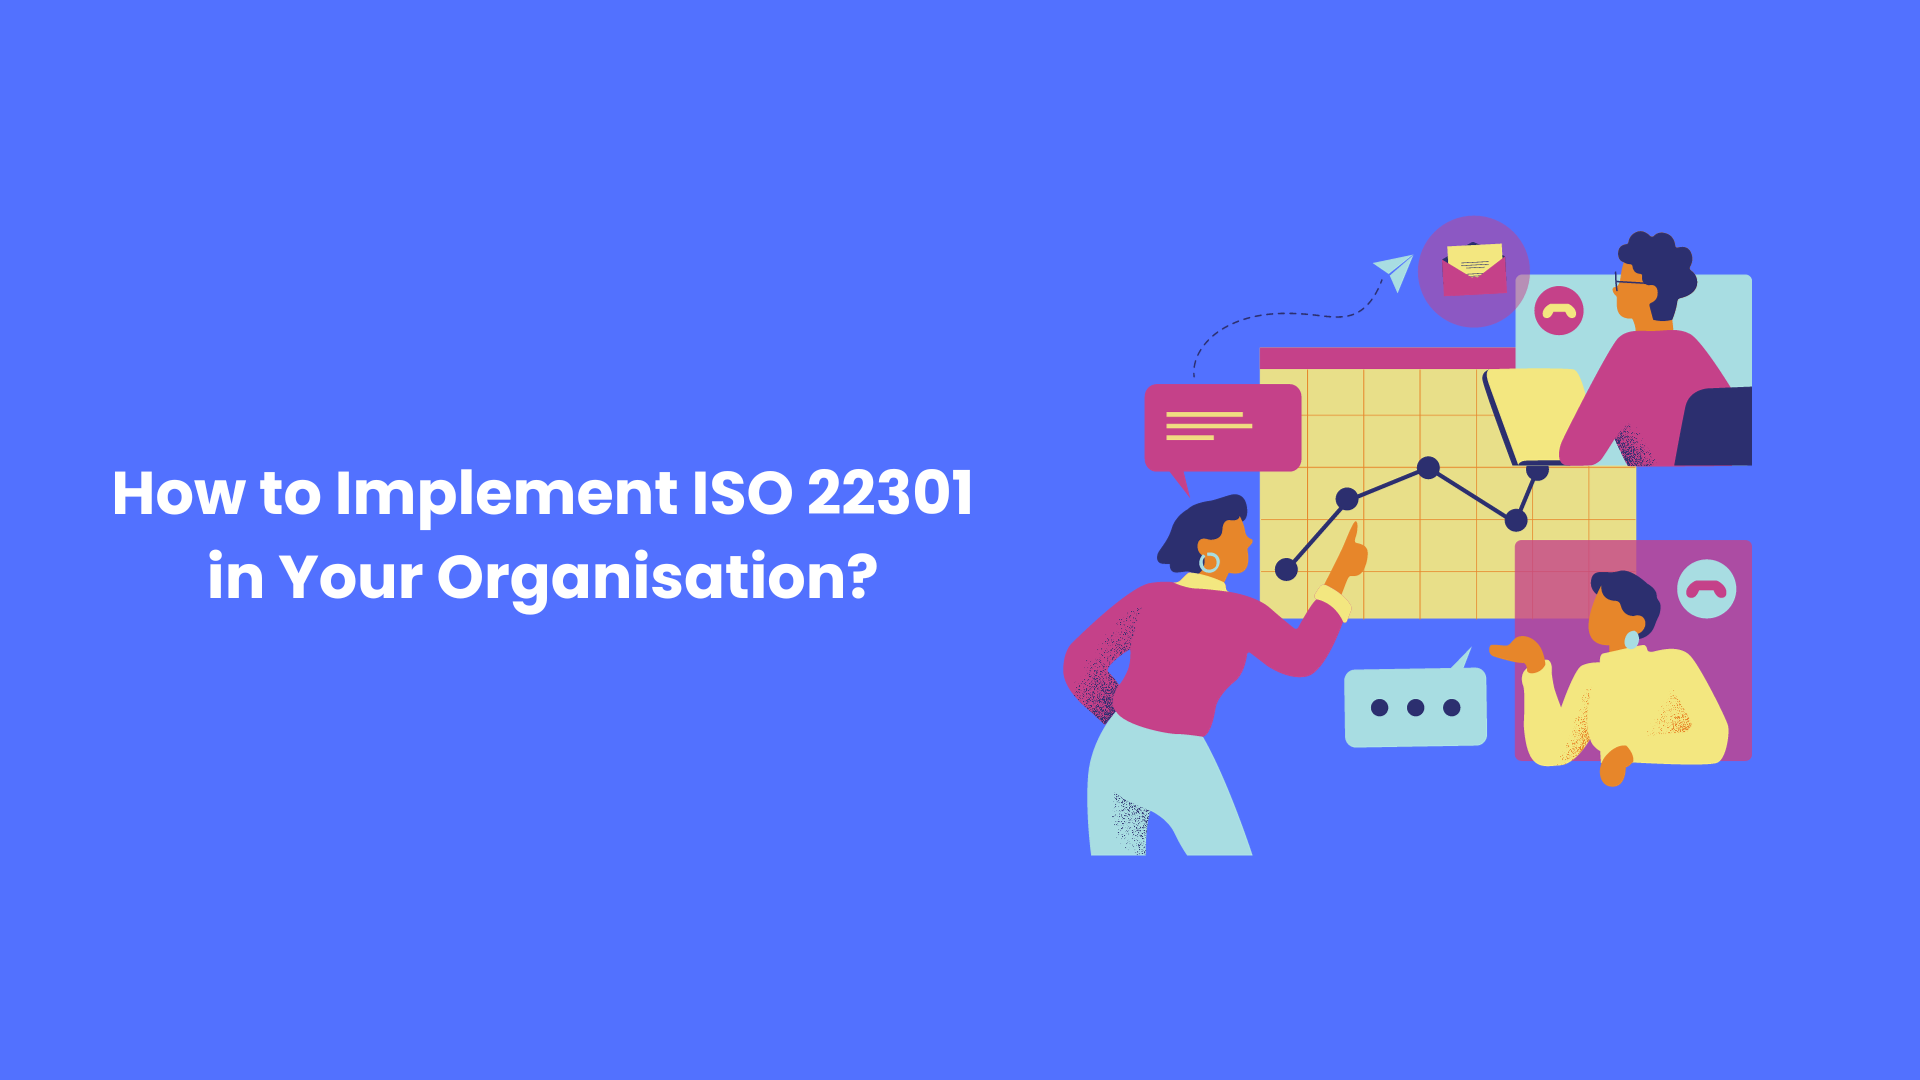 How to Implement ISO 22301 in Your Organization